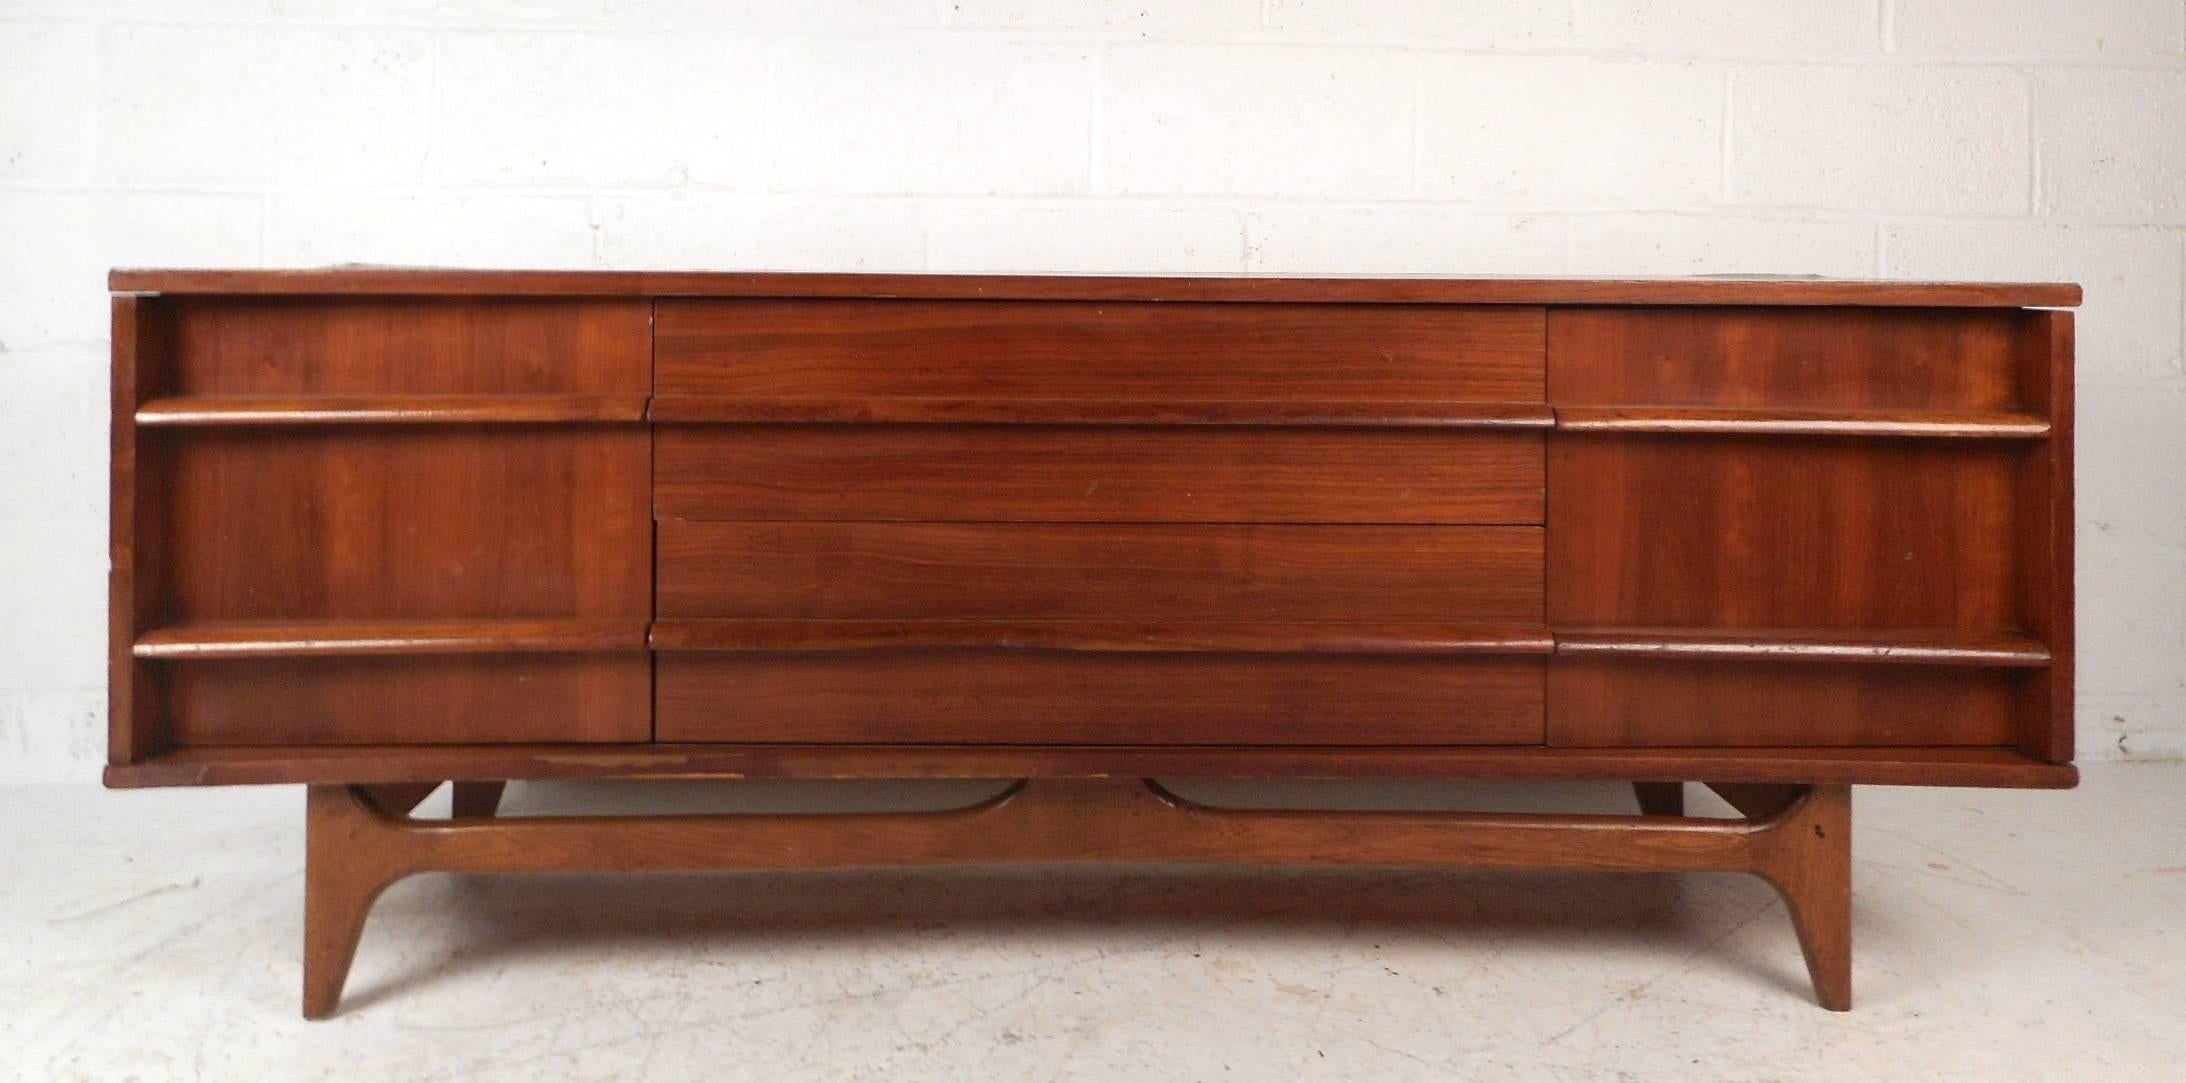 This beautiful vintage modern curved front sideboard features a dramatic curved front. The stylish design offers plenty of room for storage within its large open compartments on each side and the two hefty drawers in the middle. Extremely unique low